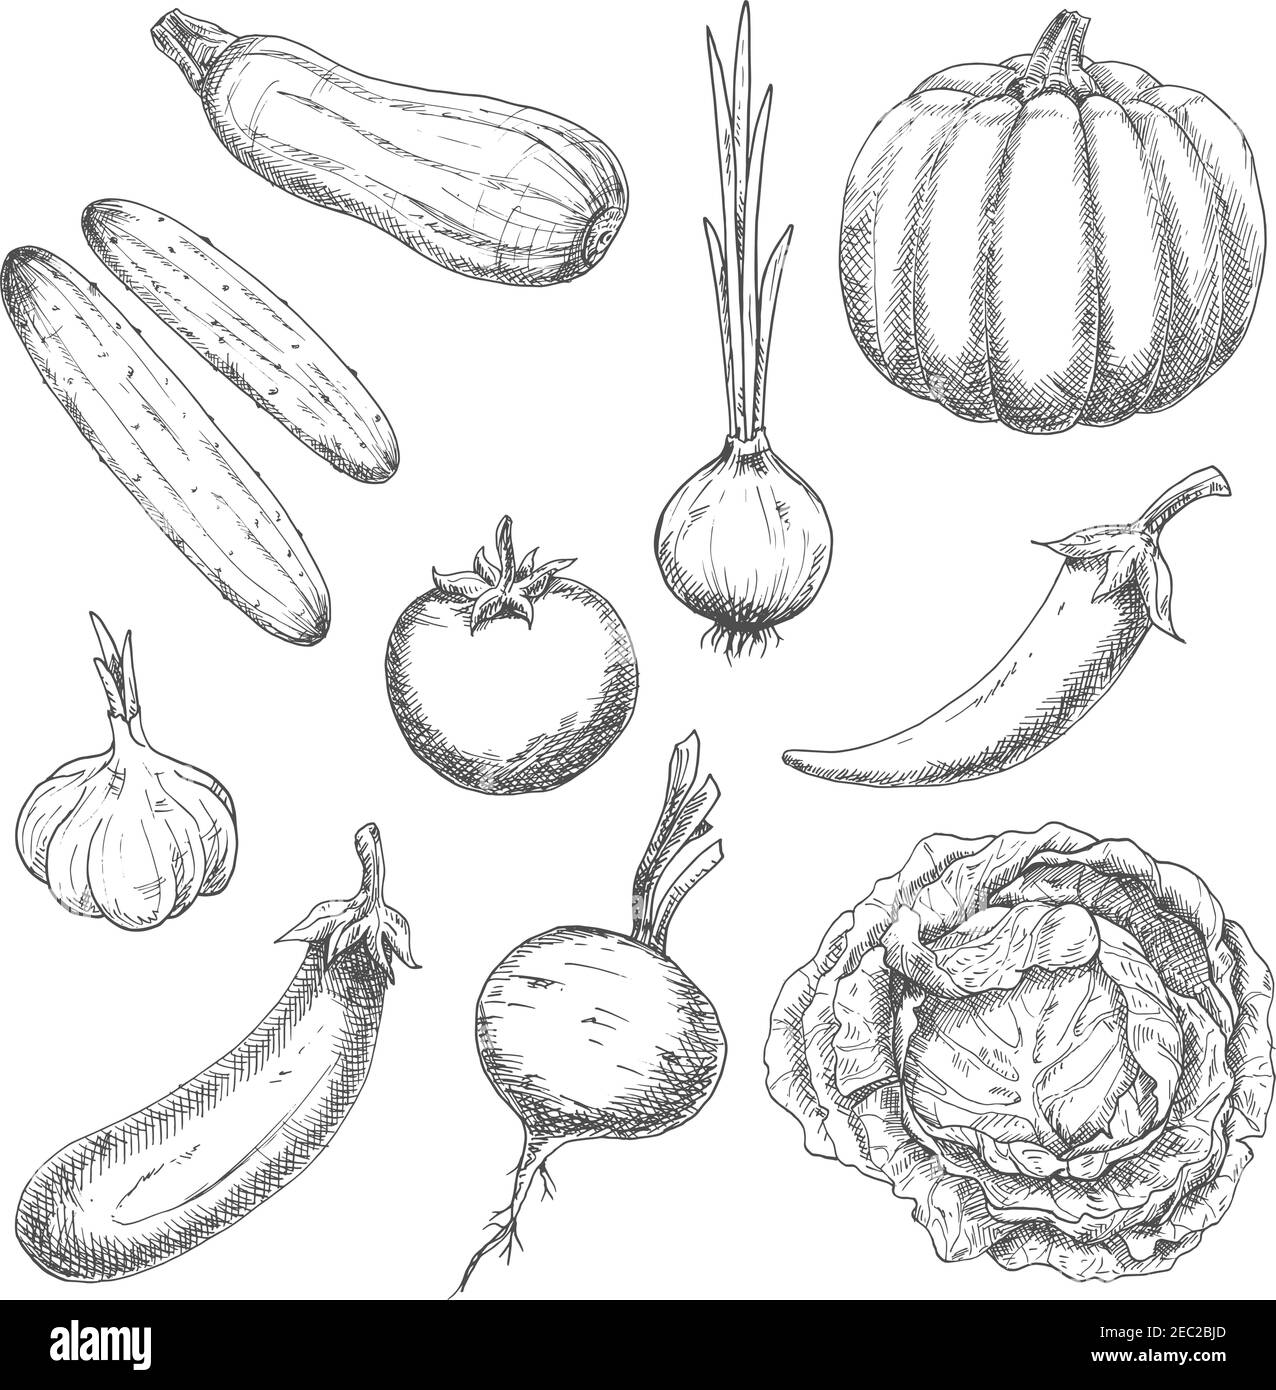 Wholesome organically grown farm vegetables sketch symbols with pumpkin, cabbage, garlic, onion, chili pepper, tomato, eggplant, cucumbers, beet and z Stock Vector